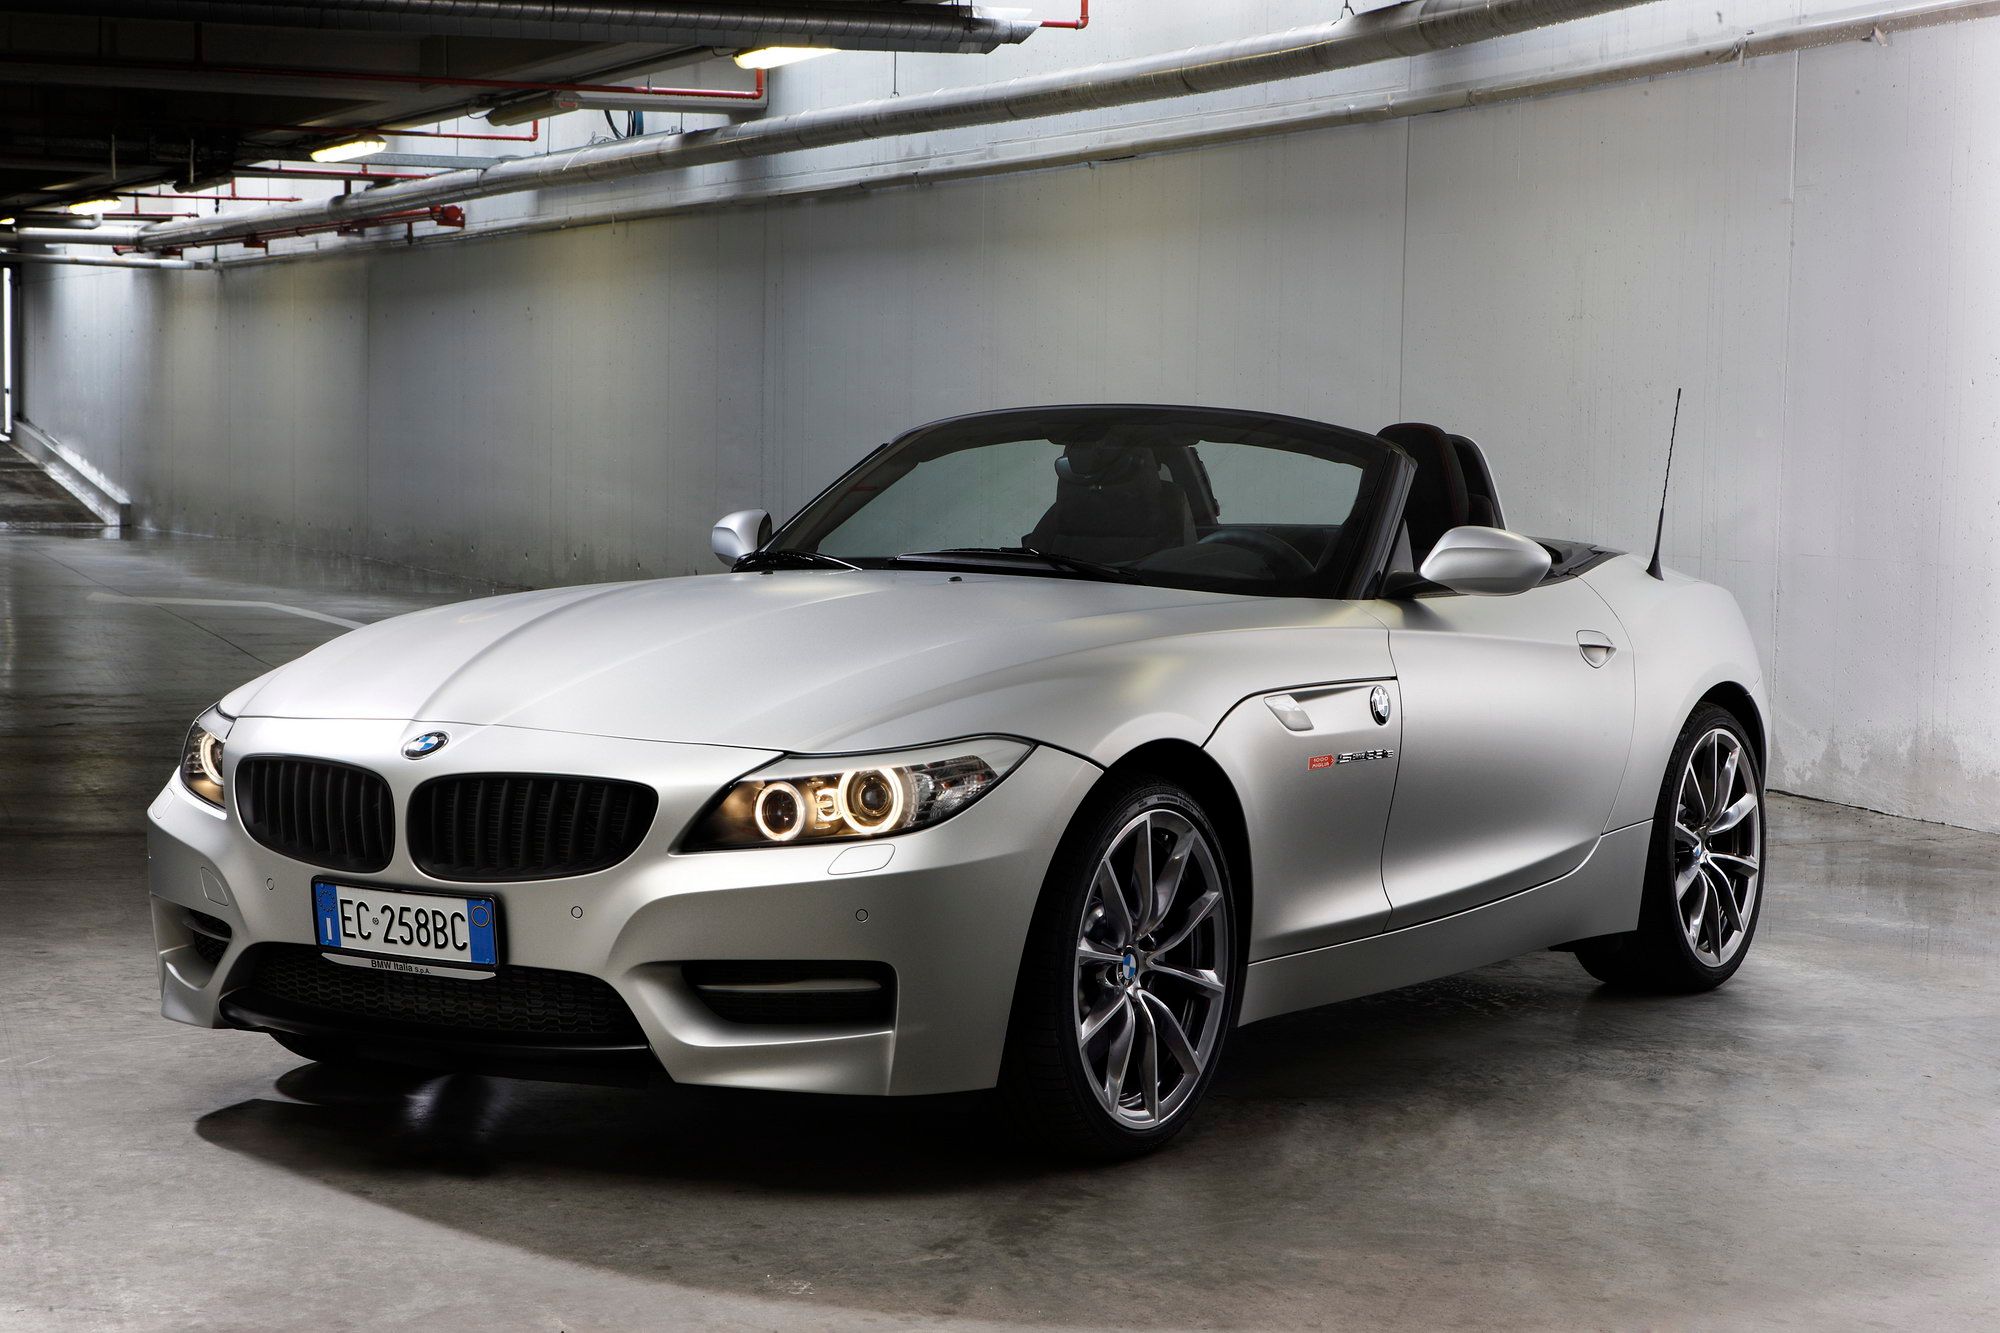 2010 BMW Z4 sDrive35is Mille Miglia Limited Edition